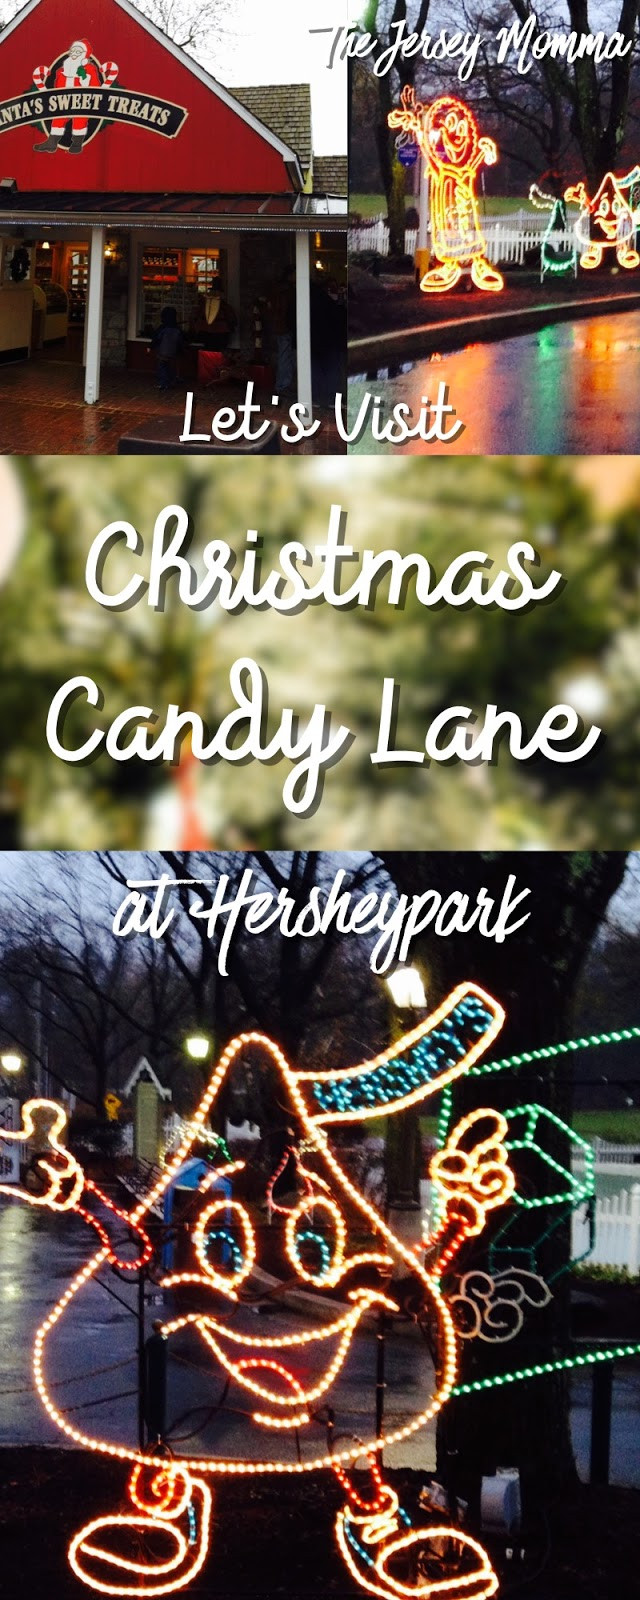 Christmas Candy Lane Hershey
 The Jersey Momma A Review of Christmas in Hershey